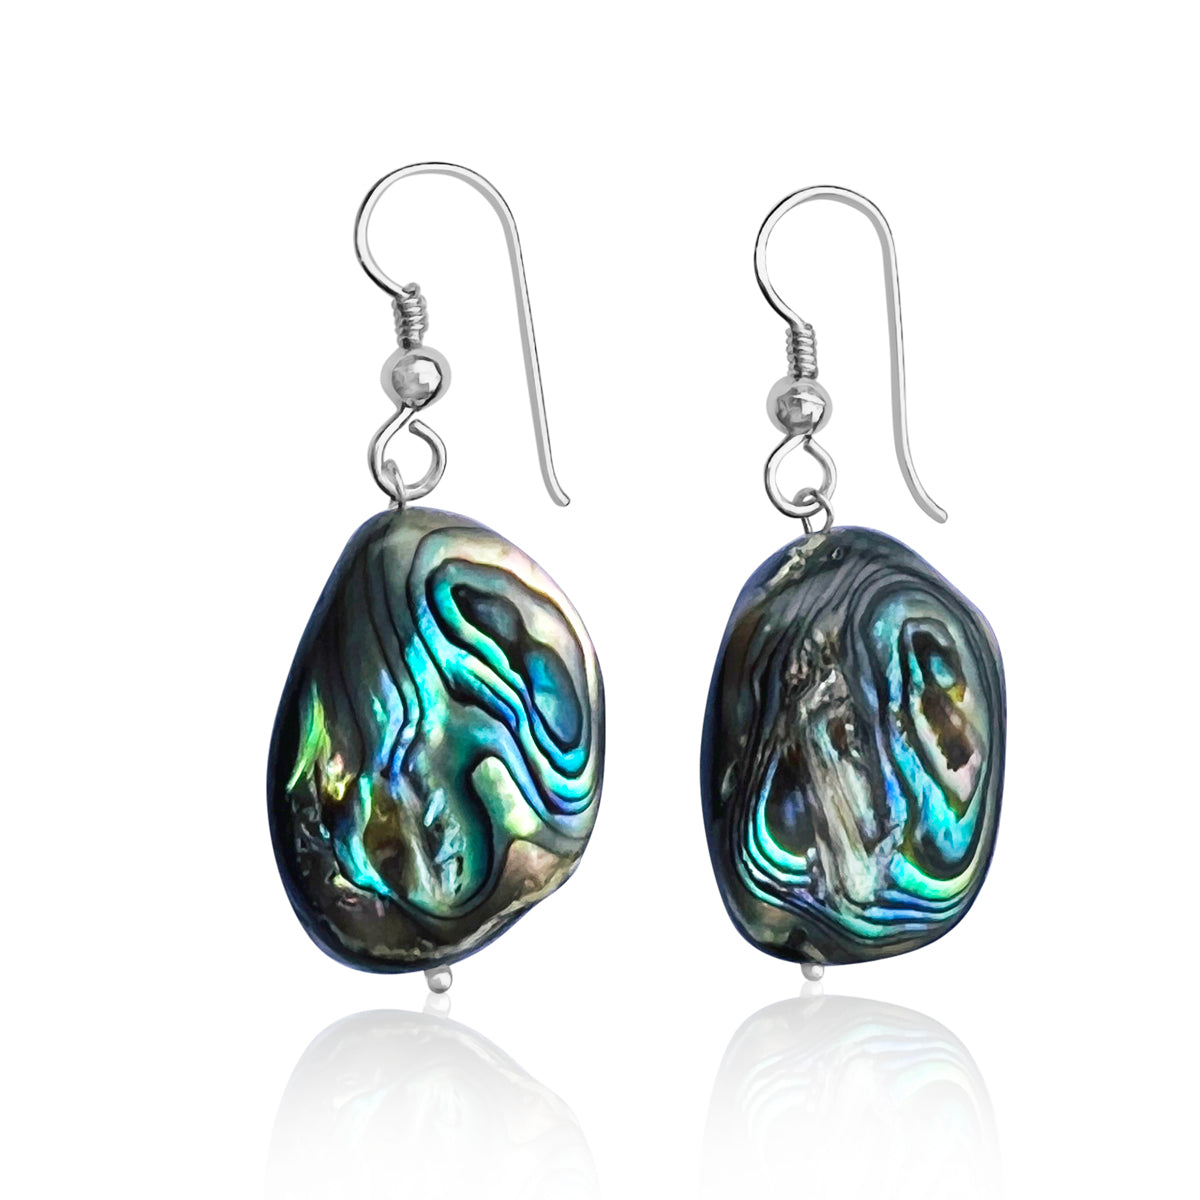 "Coastal Treasures" is a pair of earrings that celebrates the raw and untamed beauty of nature. 